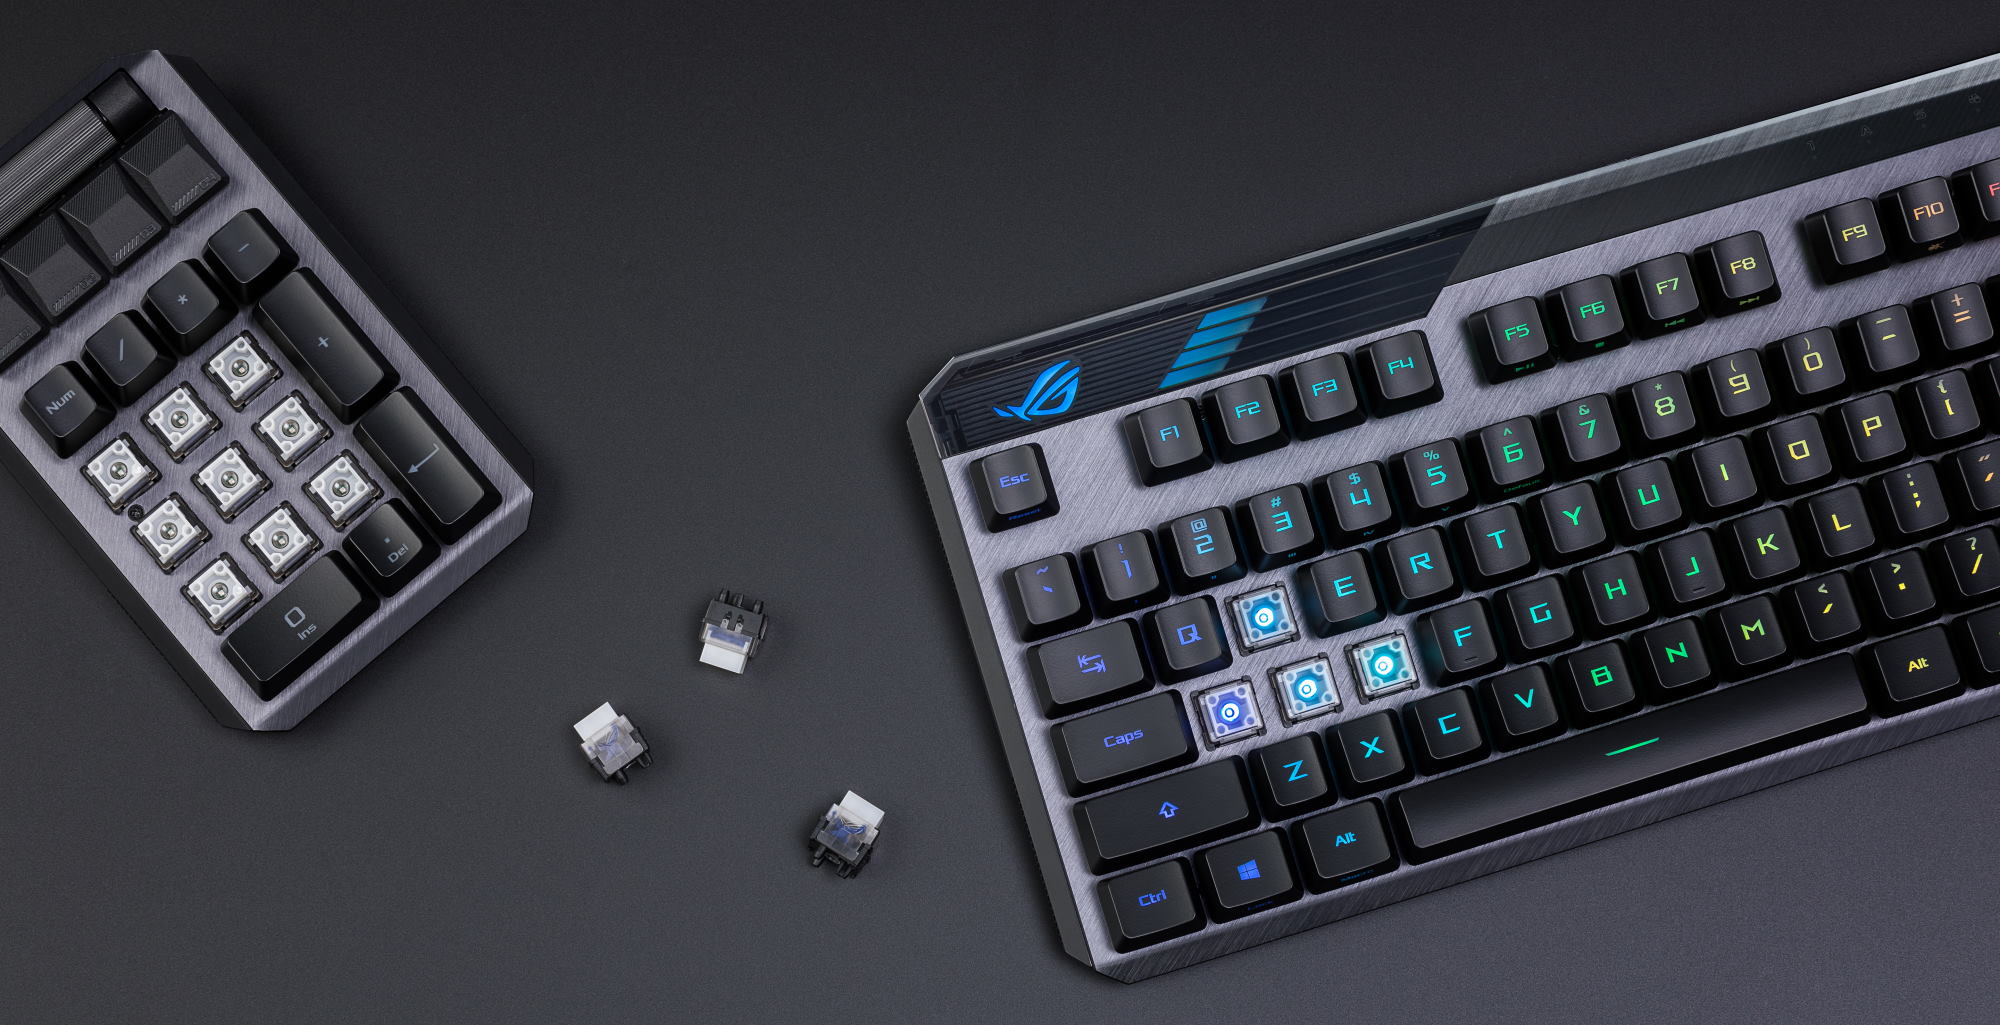 ROG Claymore keyboard, with WASD keys removed, and the number pad next to the keyboard with all number keys removed.